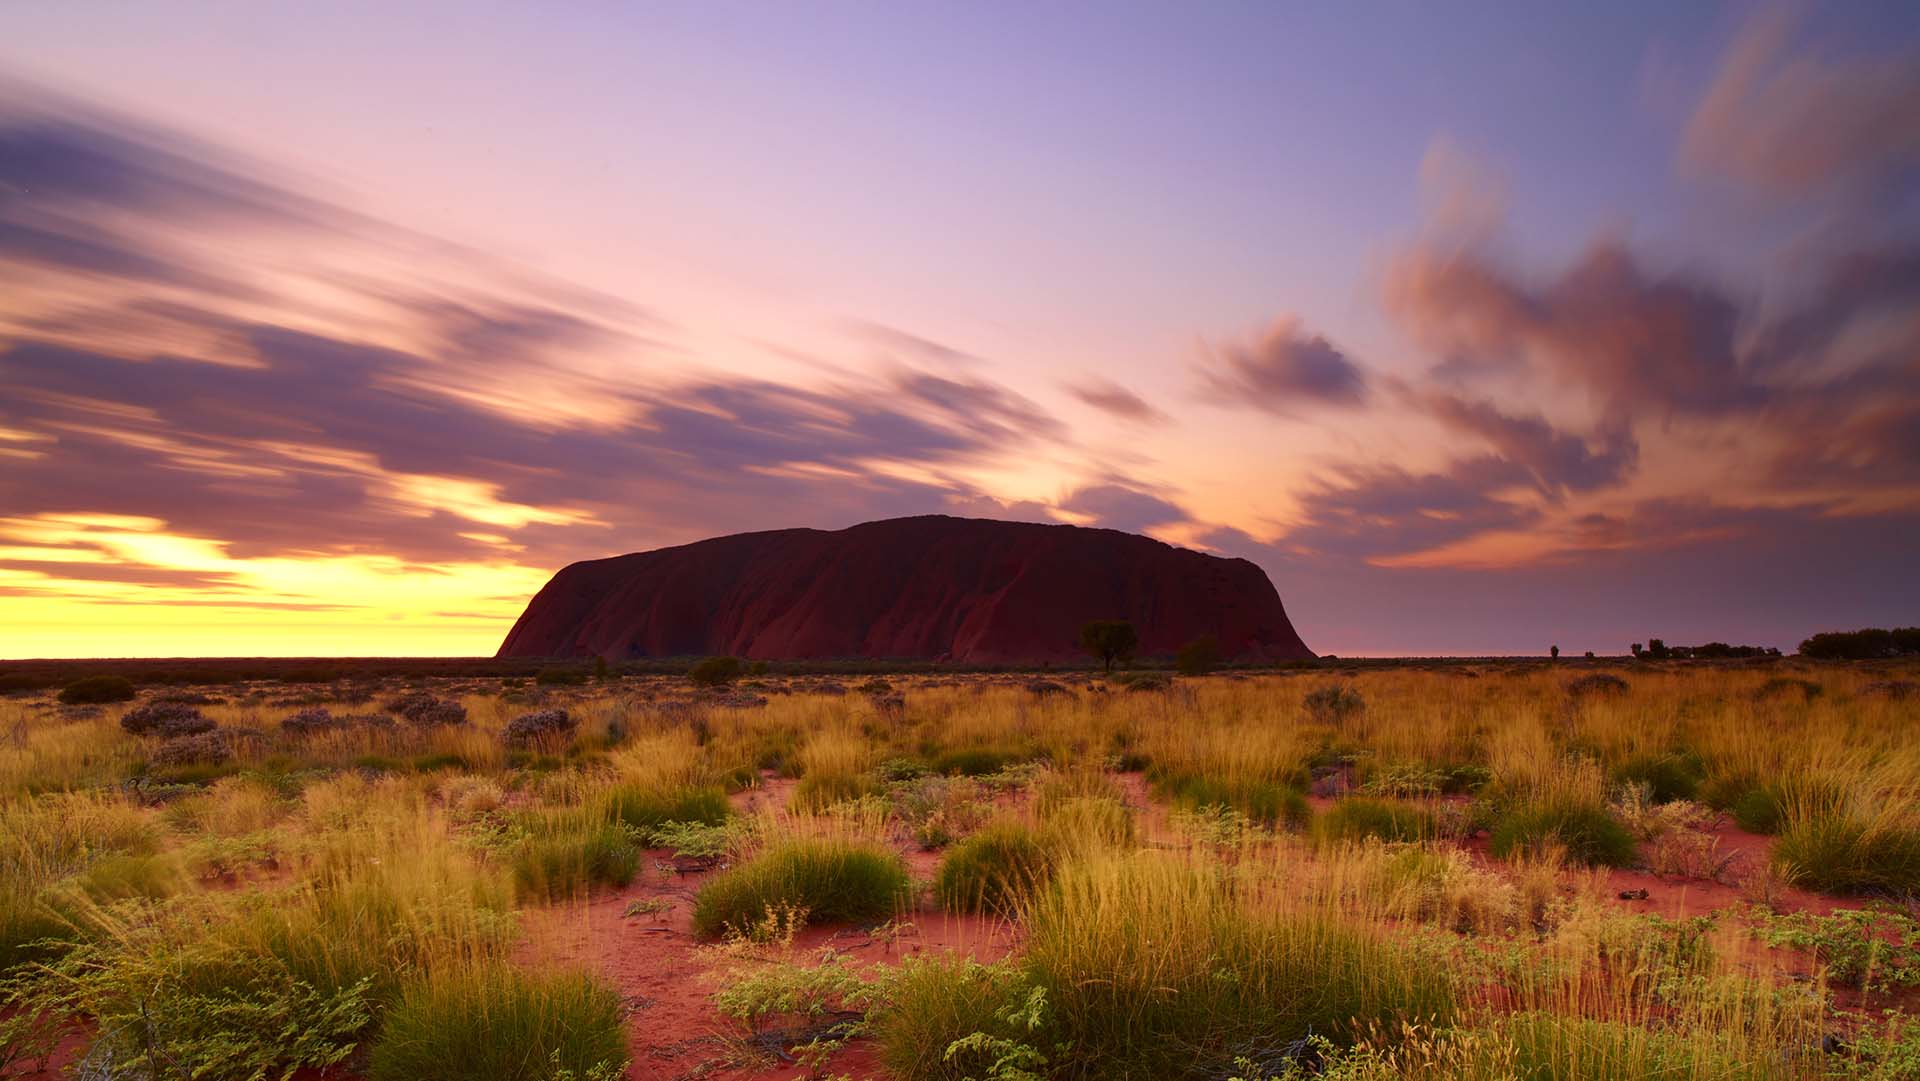 Northern Territory, Australia - May 18, 2011: Long exposure of dawn at Uluru, in Australia's Northern Territory. Sunrise is approaching, and the great sandstone monolith is lit by the lightening sky.